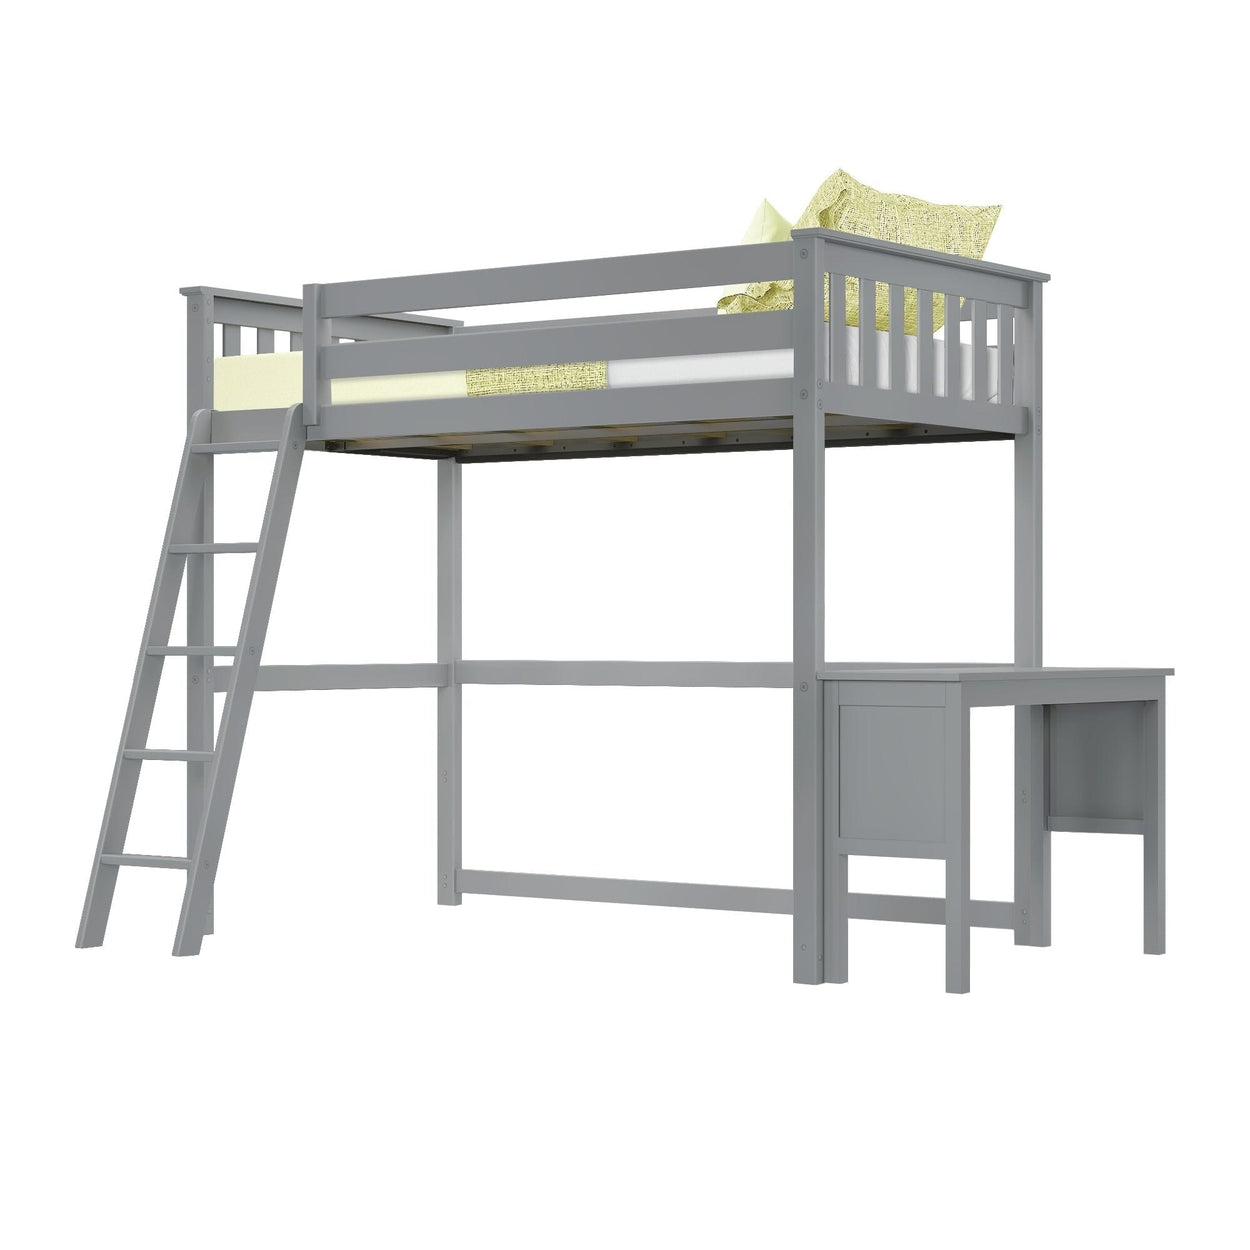 185427-121 : Loft Beds Twin-Size High Loft Bed with Ladder on End and Desk, Grey